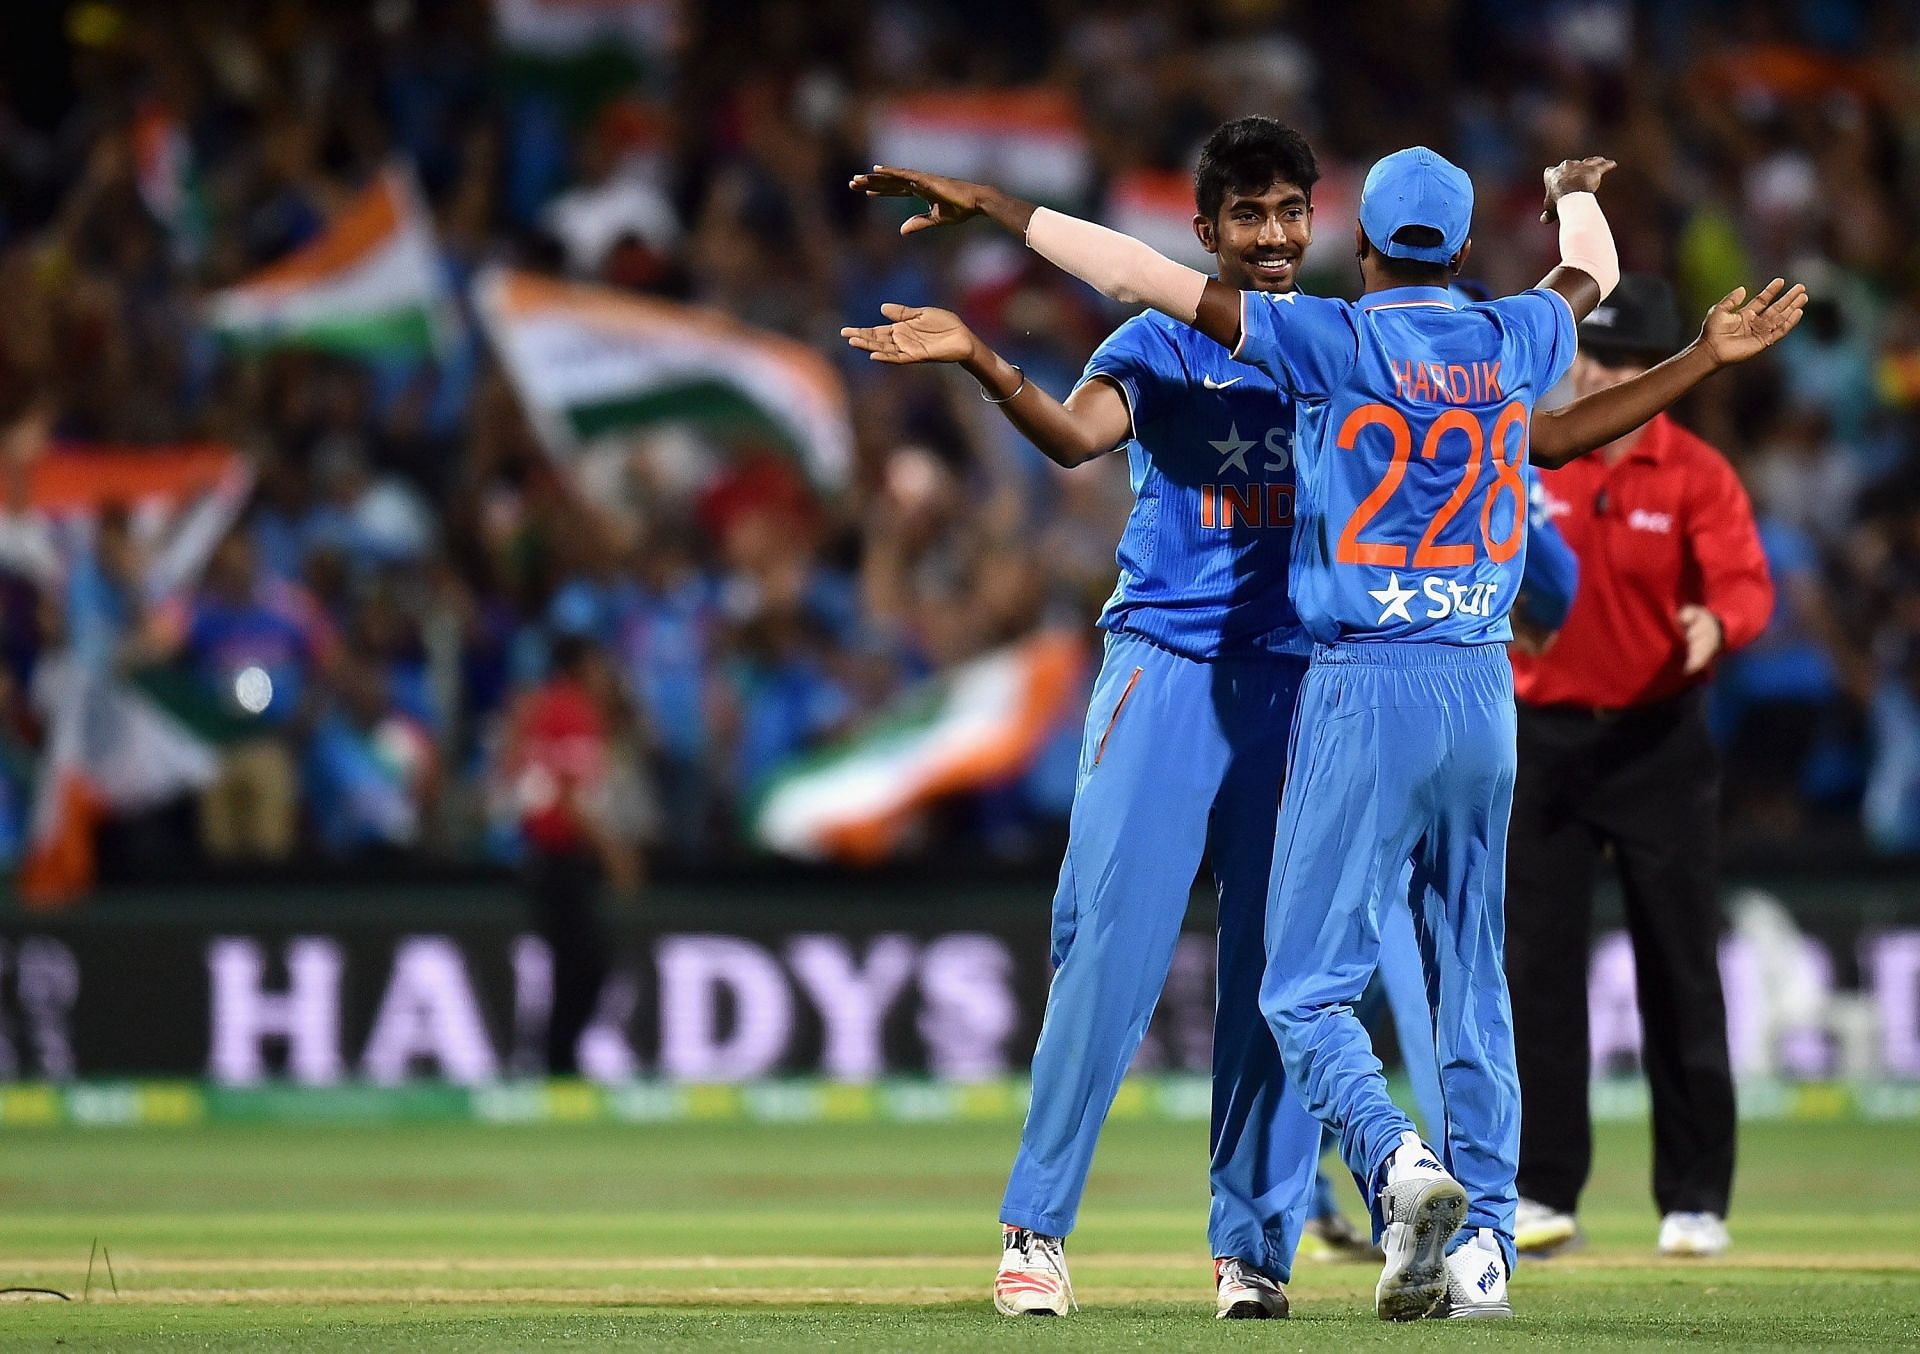 Jasprit Bumrah celebrates with Hardik Pandya after Team India's win over Australia in the 2016 T20I. Image: Getty Images